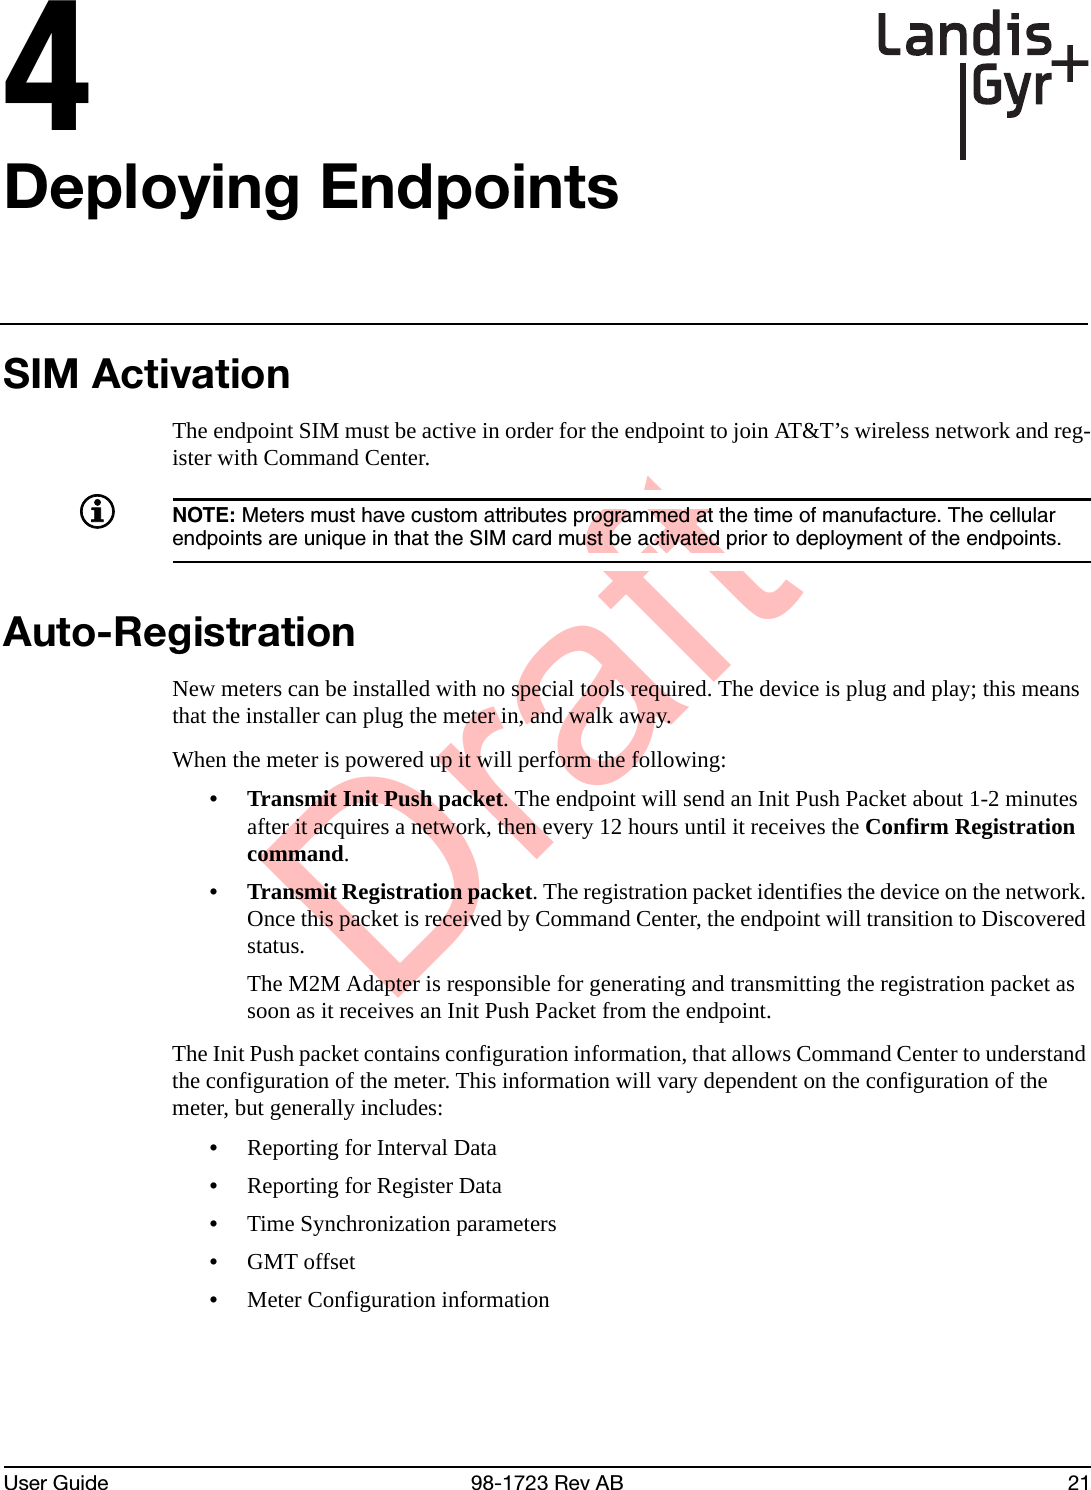 DraftUser Guide 98-1723 Rev AB 214Deploying EndpointsSIM ActivationThe endpoint SIM must be active in order for the endpoint to join AT&amp;T’s wireless network and reg-ister with Command Center.NOTE: Meters must have custom attributes programmed at the time of manufacture. The cellular endpoints are unique in that the SIM card must be activated prior to deployment of the endpoints.Auto-RegistrationNew meters can be installed with no special tools required. The device is plug and play; this means that the installer can plug the meter in, and walk away.When the meter is powered up it will perform the following:• Transmit Init Push packet. The endpoint will send an Init Push Packet about 1-2 minutes after it acquires a network, then every 12 hours until it receives the Confirm Registration command.• Transmit Registration packet. The registration packet identifies the device on the network. Once this packet is received by Command Center, the endpoint will transition to Discovered status. The M2M Adapter is responsible for generating and transmitting the registration packet as soon as it receives an Init Push Packet from the endpoint.The Init Push packet contains configuration information, that allows Command Center to understand the configuration of the meter. This information will vary dependent on the configuration of the meter, but generally includes:•Reporting for Interval Data•Reporting for Register Data•Time Synchronization parameters•GMT offset•Meter Configuration information